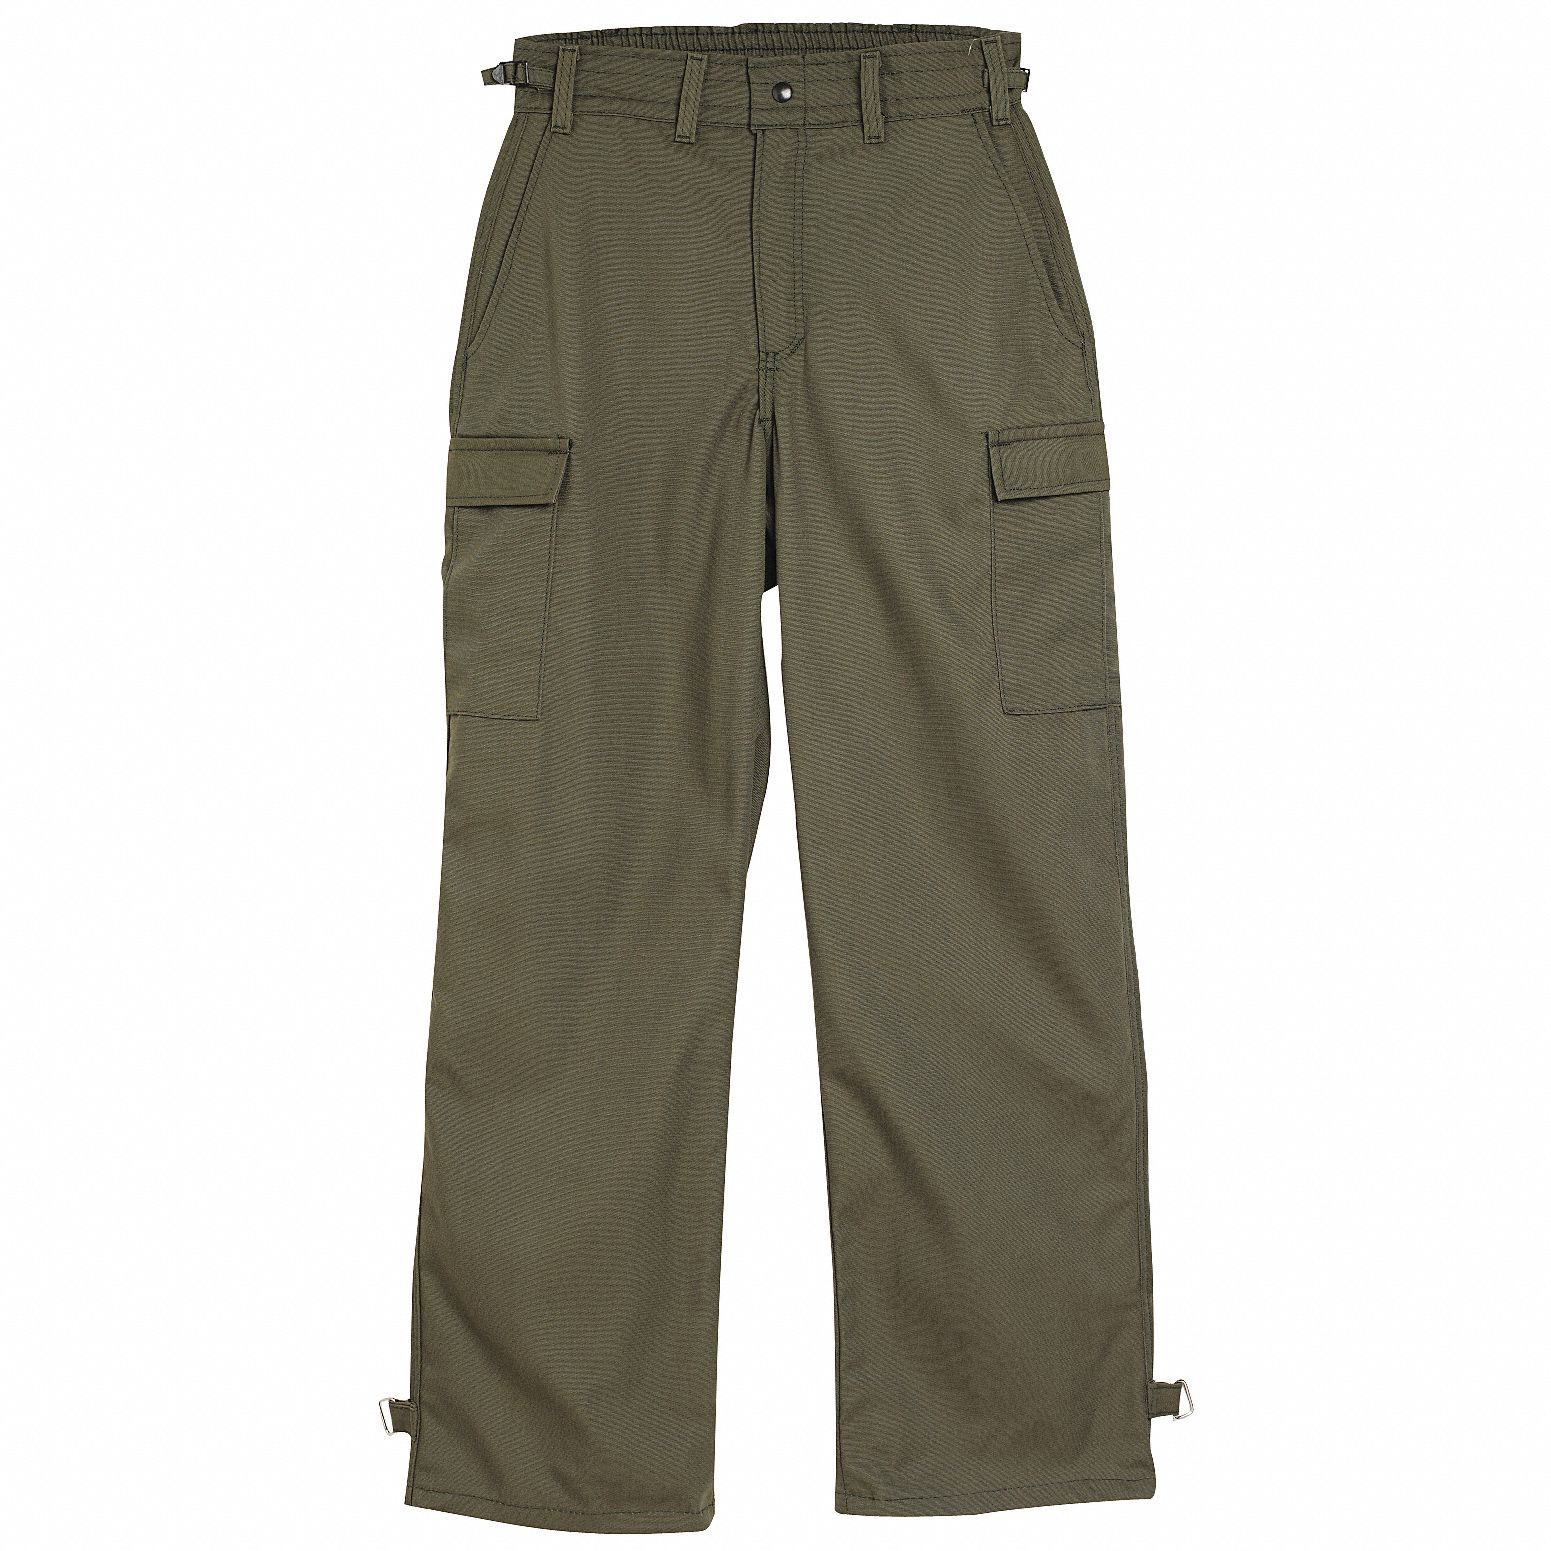 Wildland Fire Pants: 2XL, 43 to 47 in Fits Waist Size, 28 in Inseam, Olive Green